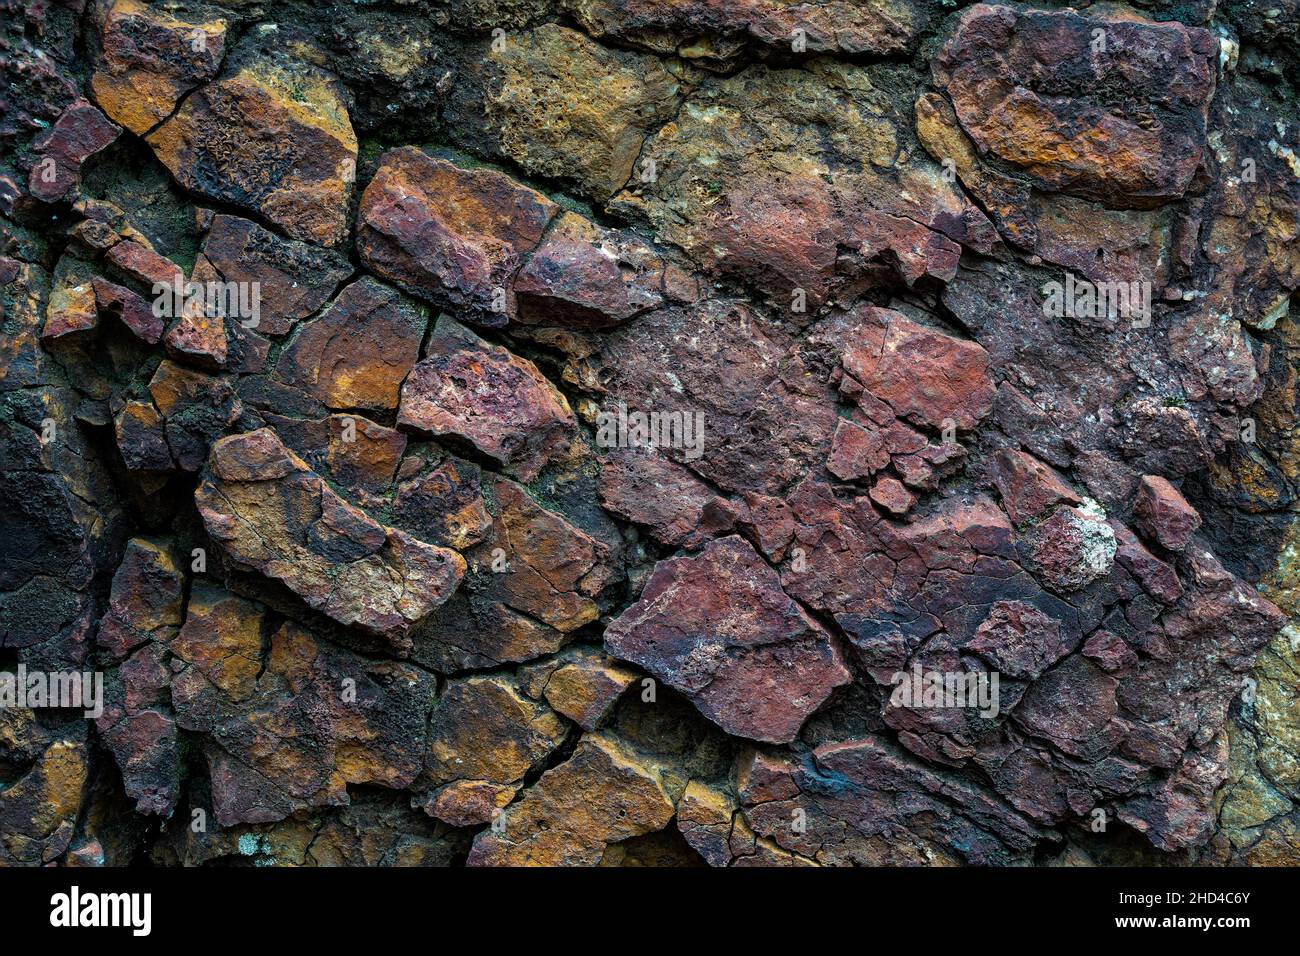 Cracked and  textured stone photo with yellow and magenta colored. Seamless and rough rock texture and pattern design. Stock Photo